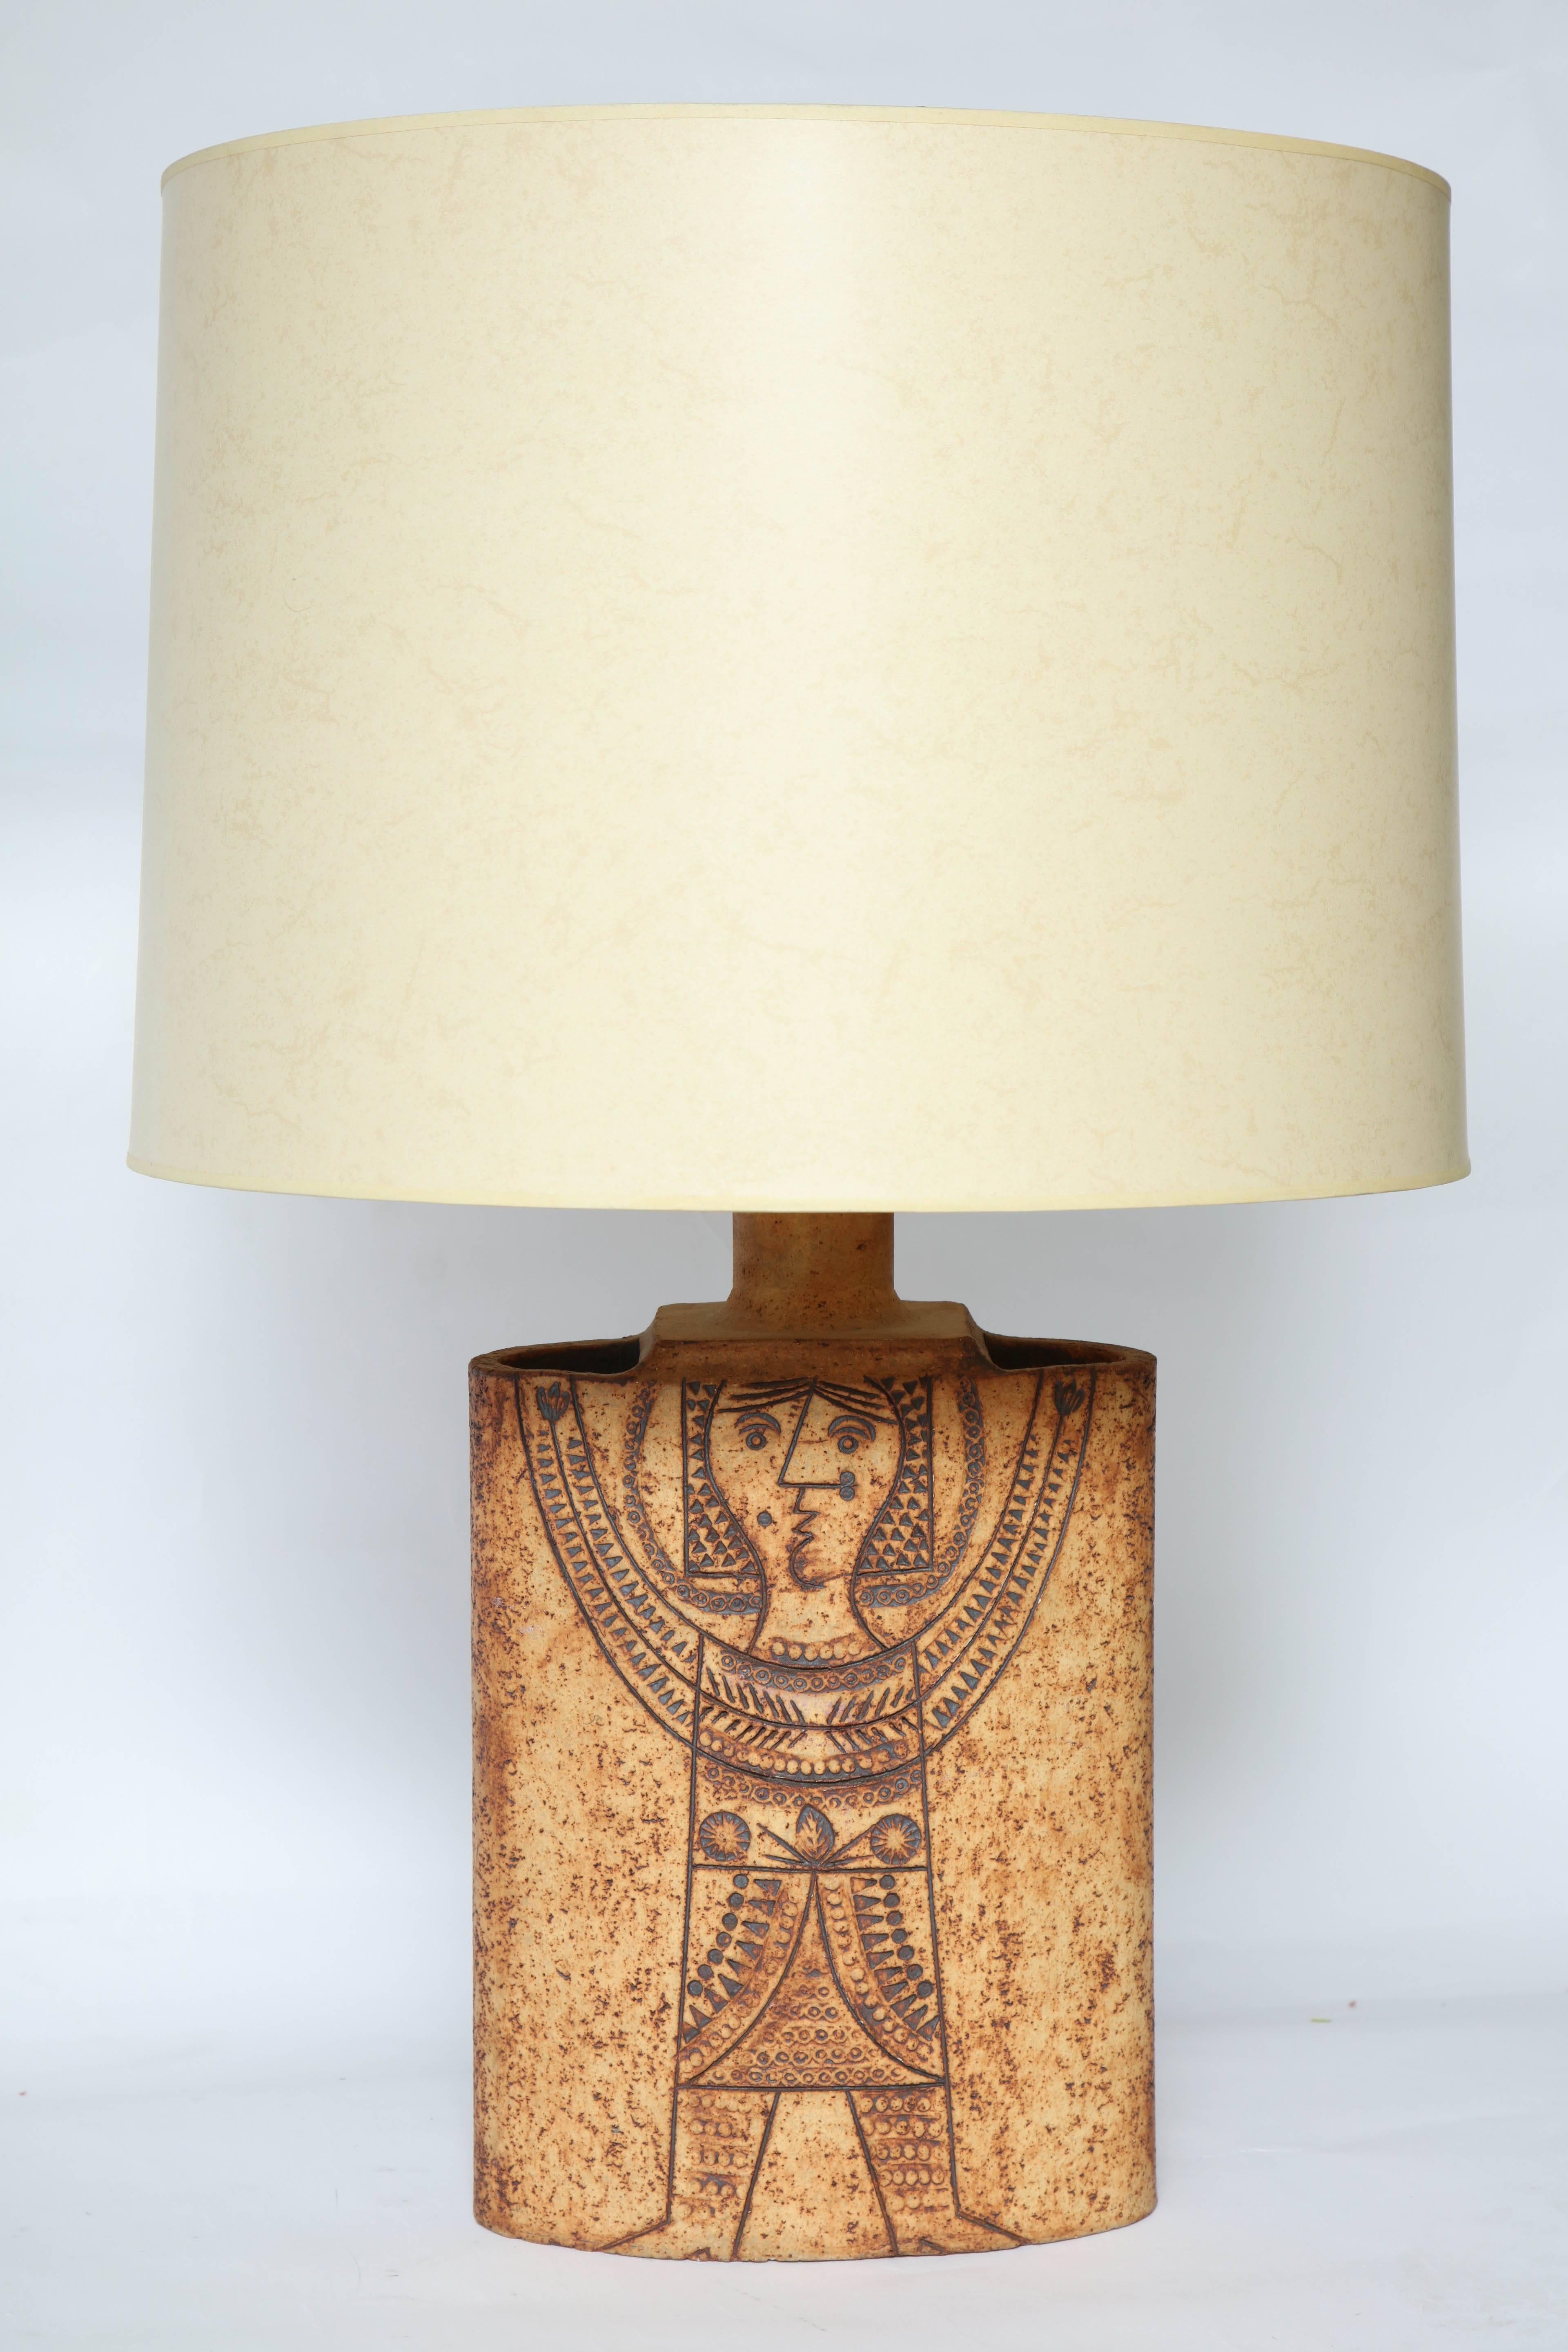 Mid-Century Modern ceramic table lamp signed Capron Valauris Paris France, circa 1950s
Shade not included.